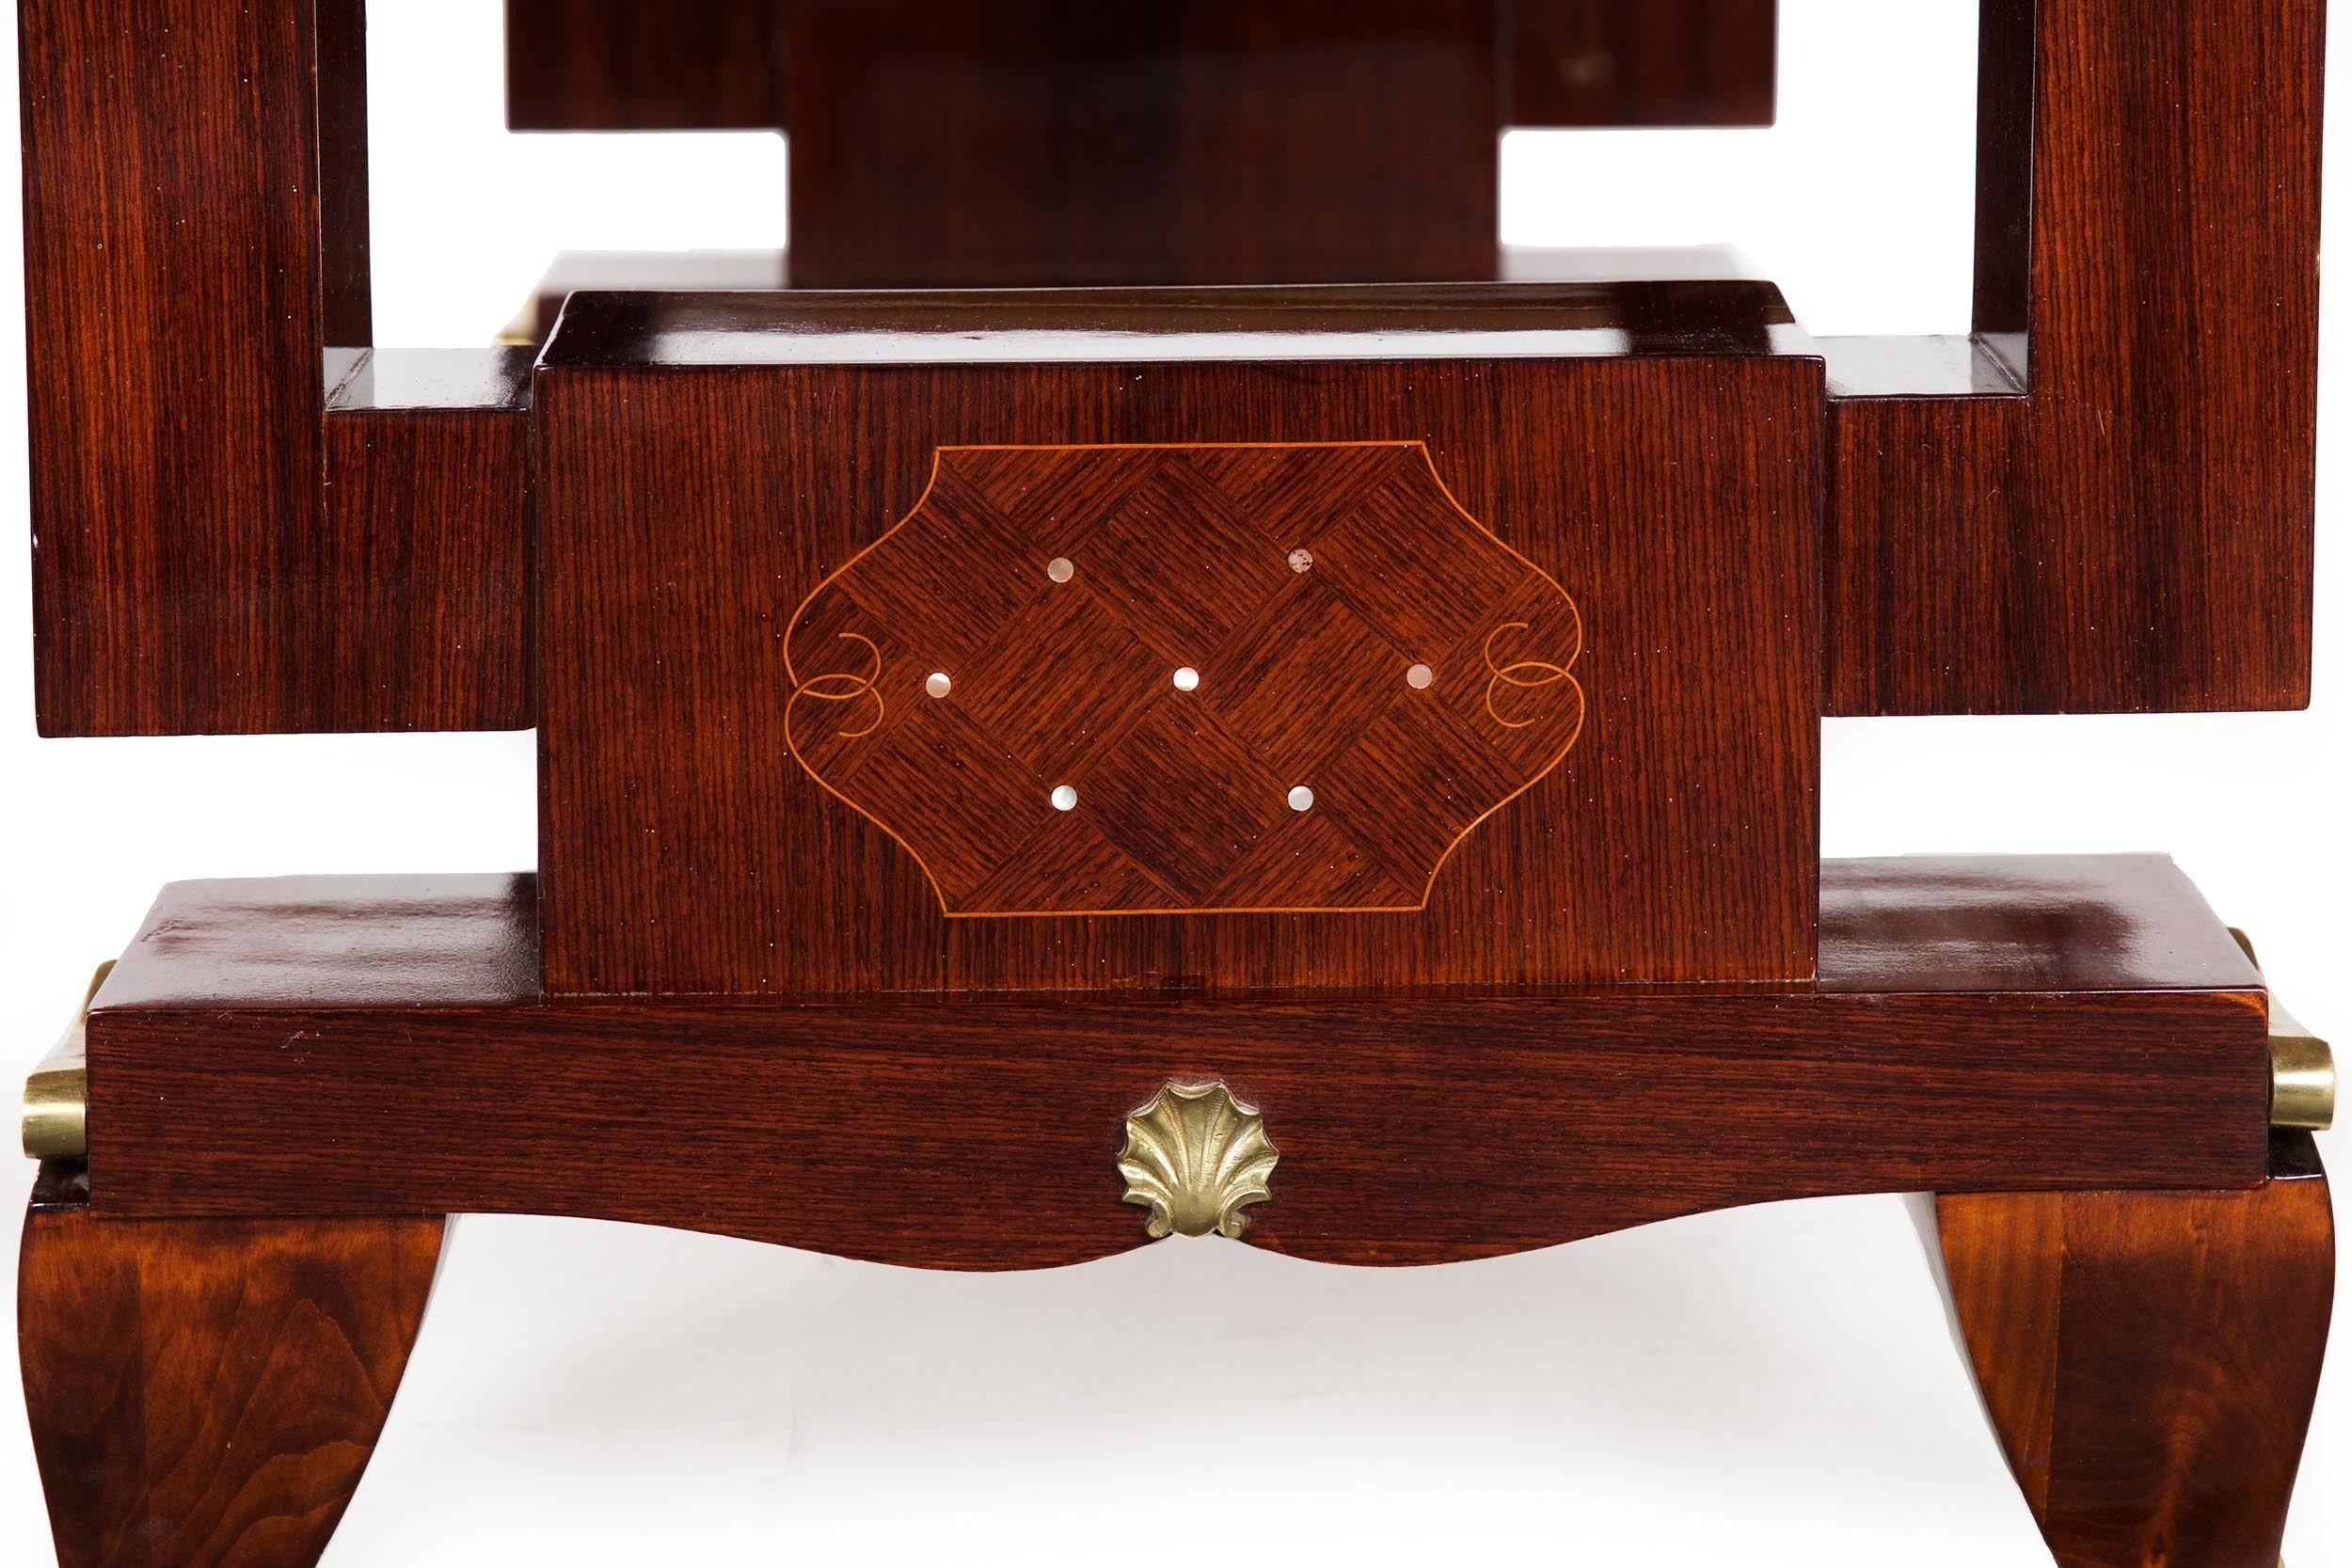 French Art Deco Inlaid Mother-of-Pearl Rosewood Dining Table, circa 1940s In Good Condition For Sale In Shippensburg, PA